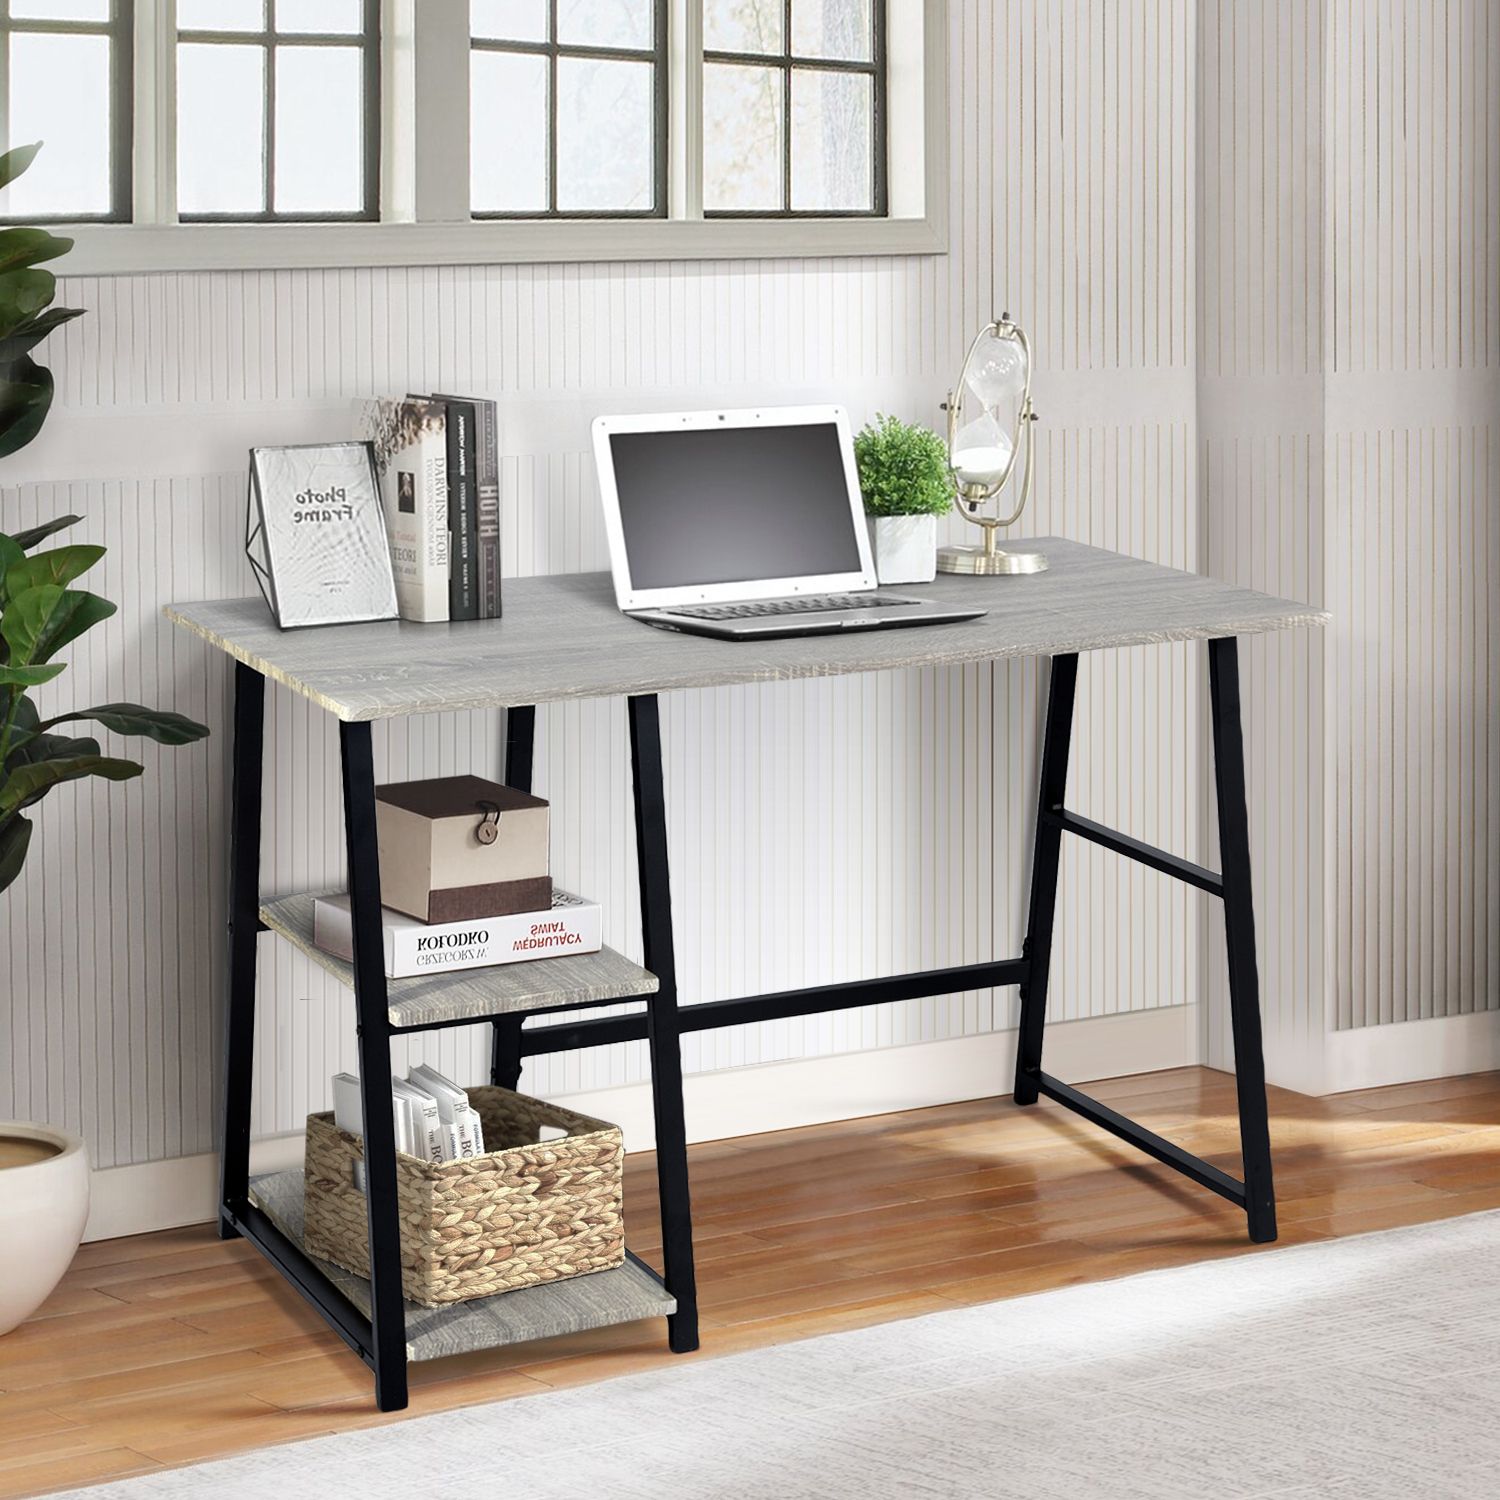 Furniturer Modern Computer Writing Desk With 2 Storage Shelves, Grey Throughout Black And Gray Oval Writing Desks (View 6 of 15)